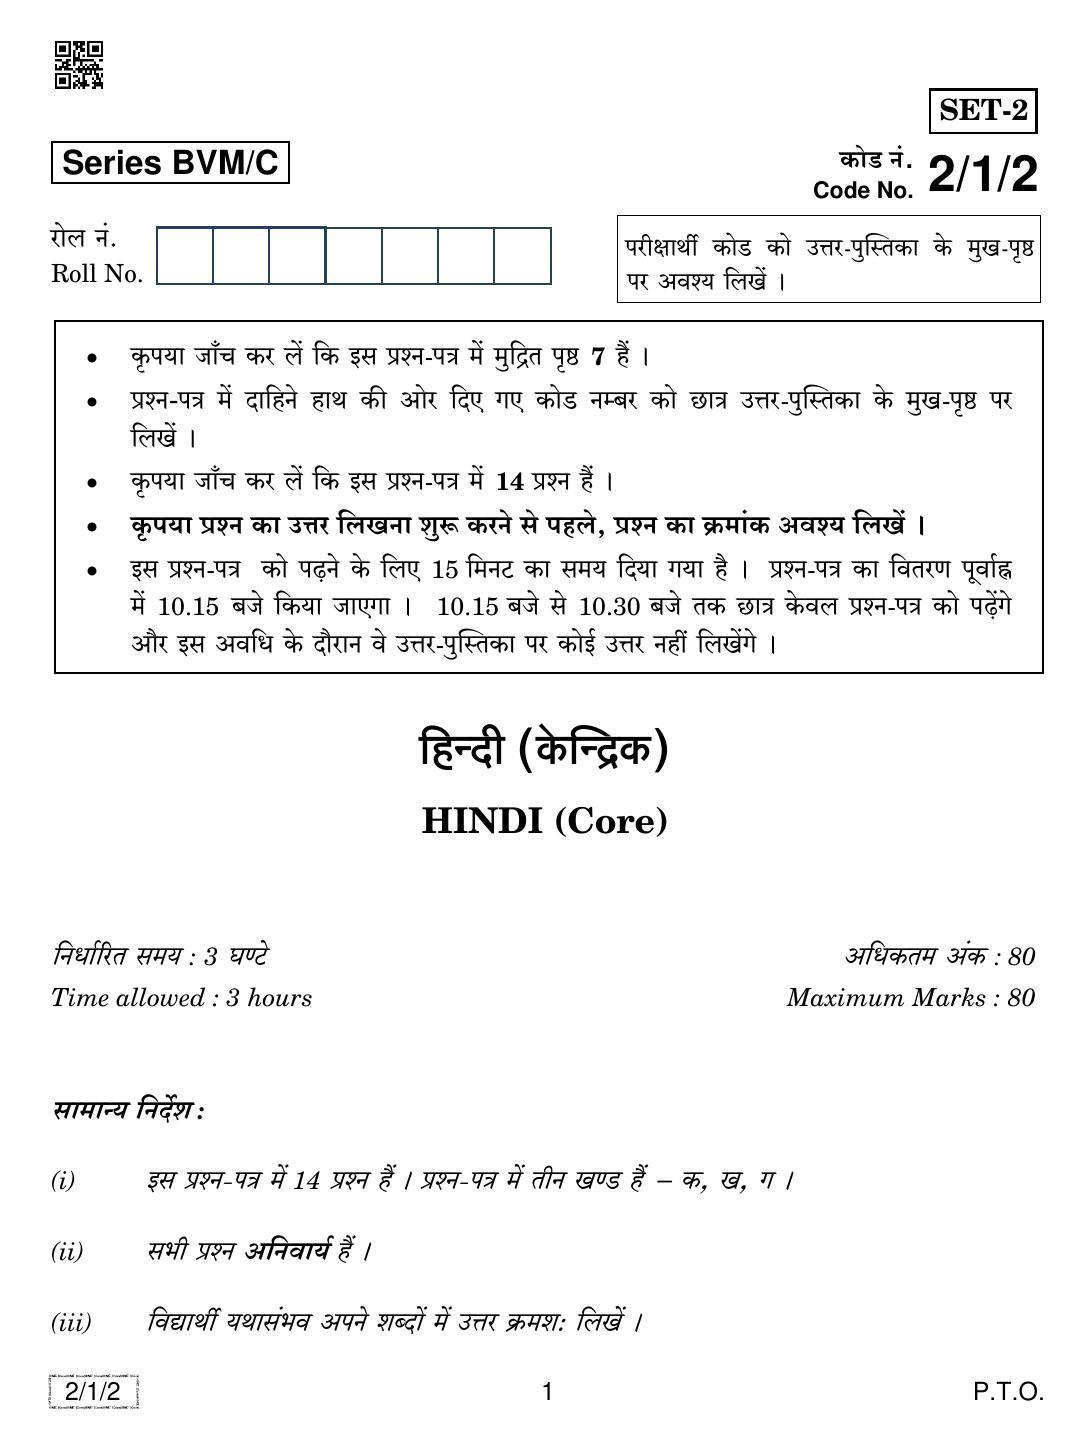 CBSE Class 12 2-1-2 HINDI CORE 2019 Compartment Question Paper - Page 1